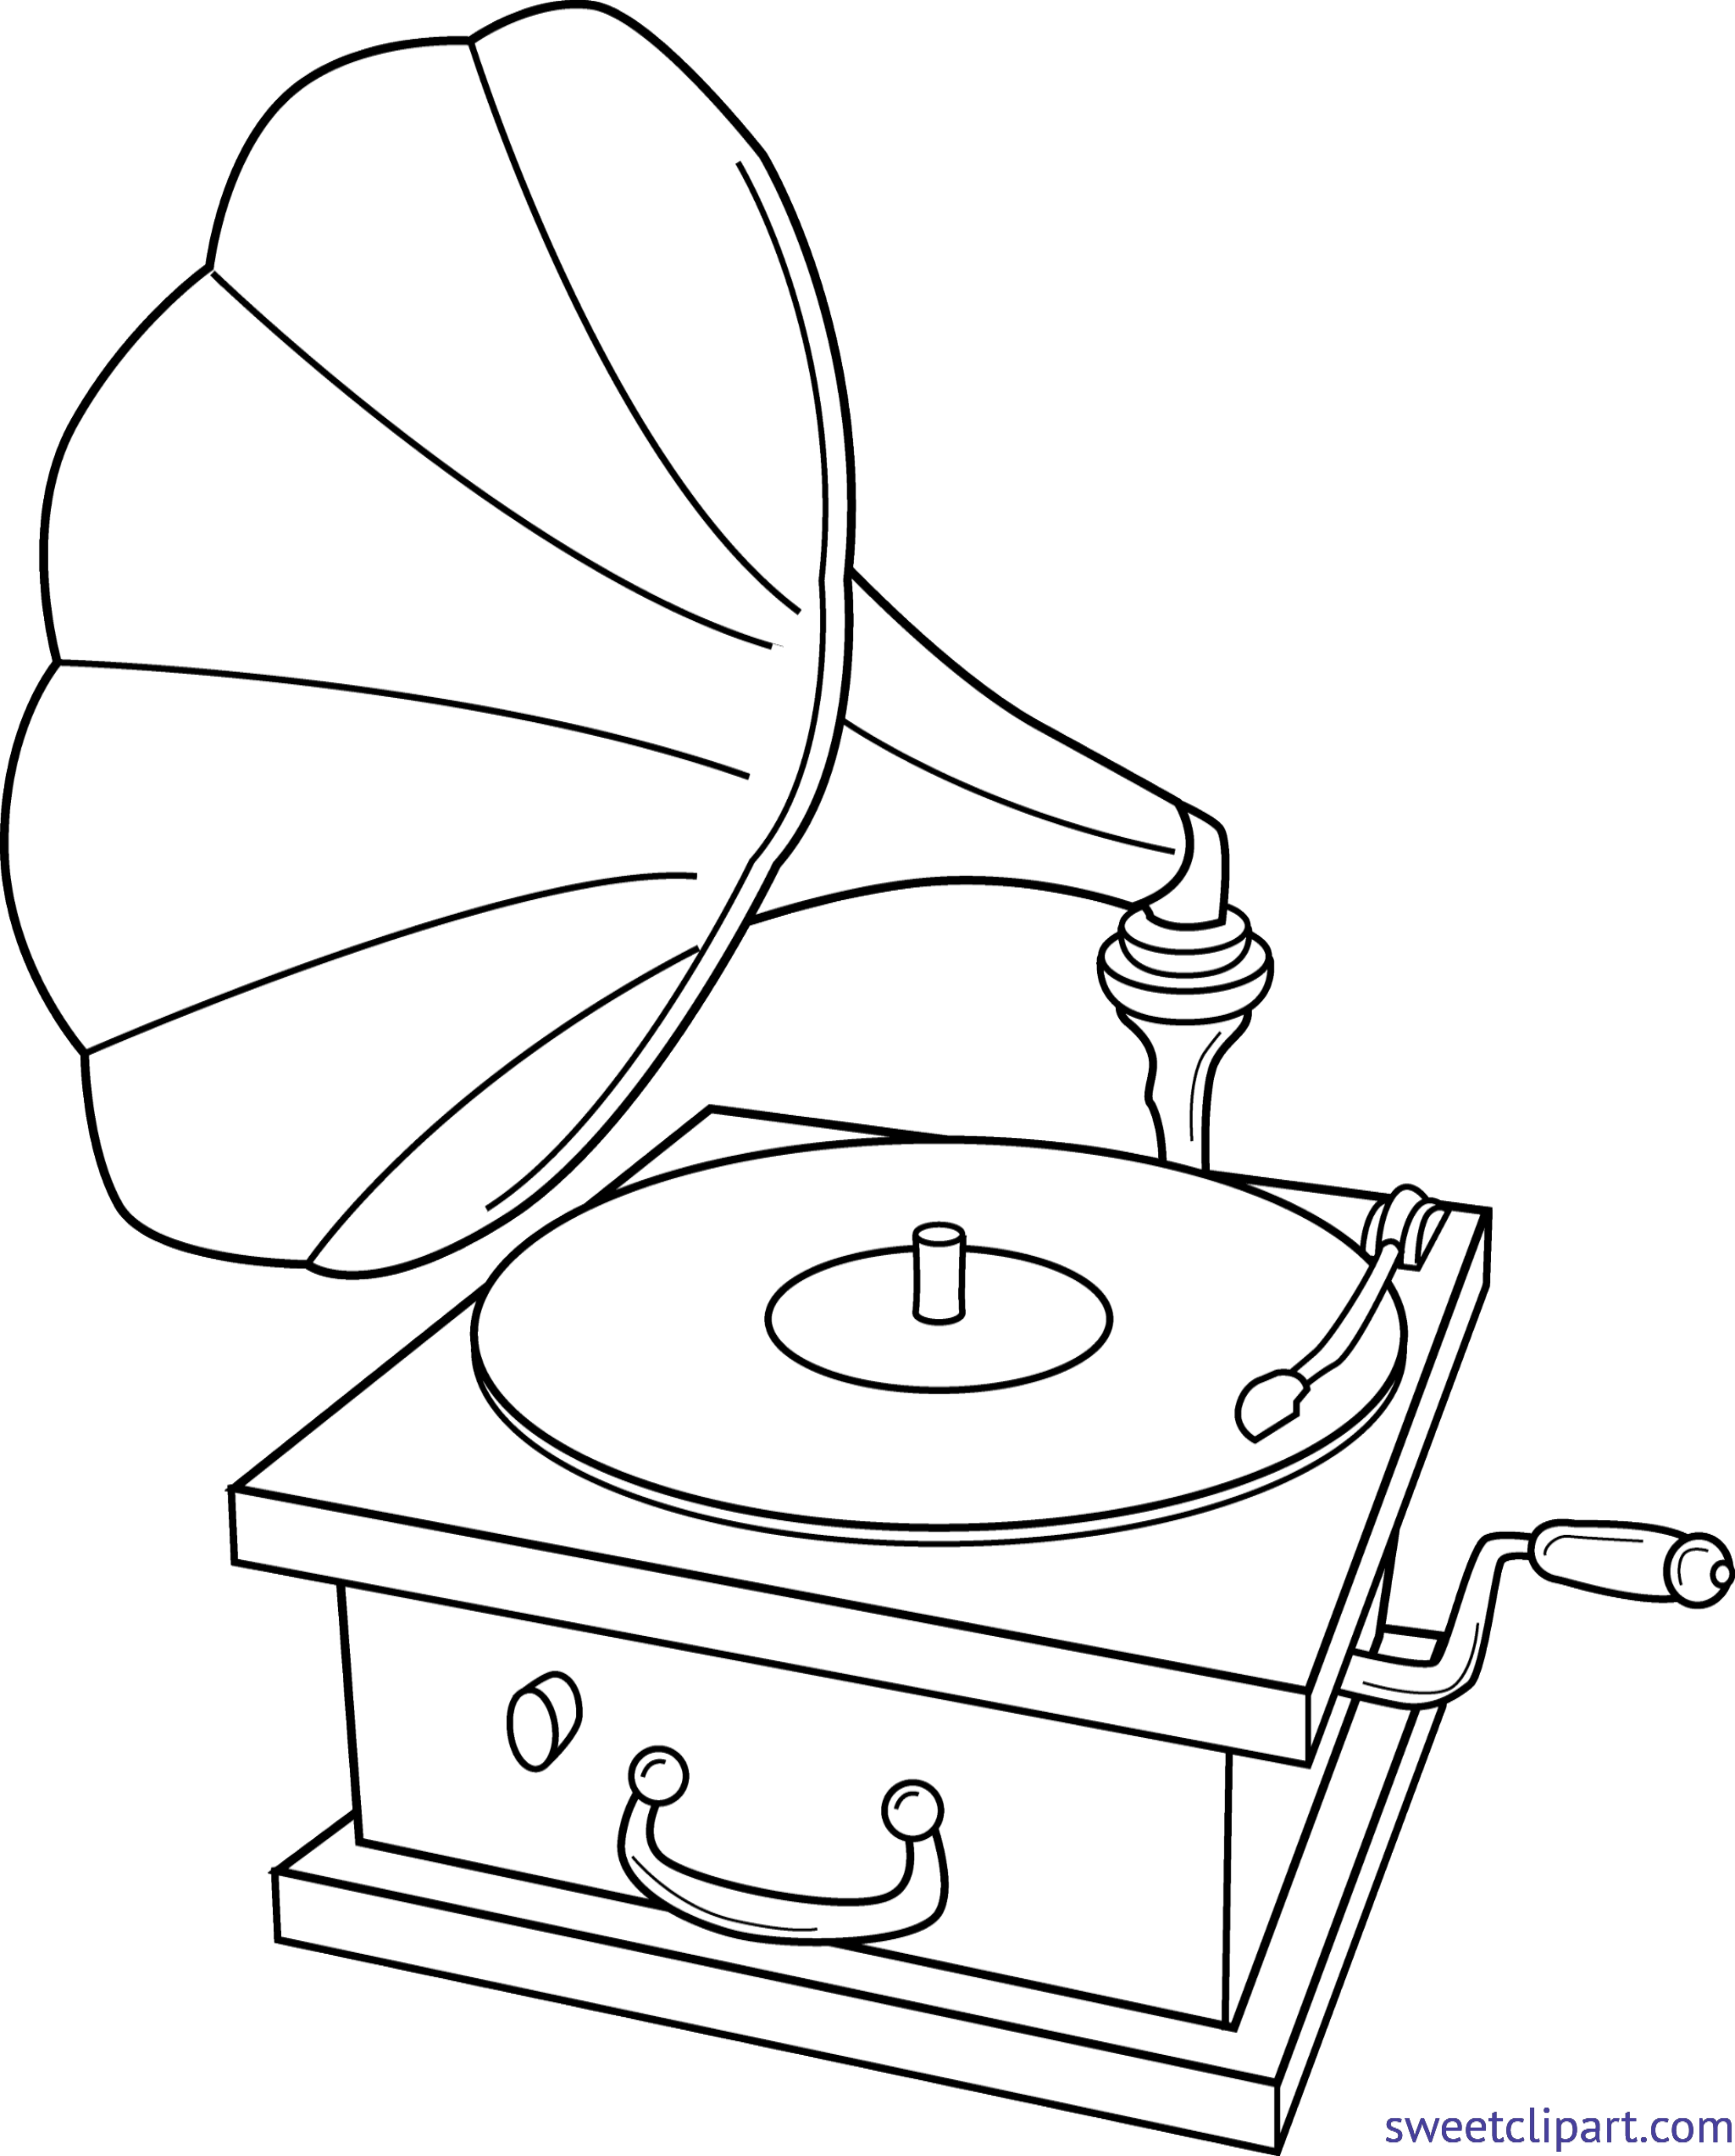 Record clipart vintage record. Player lineart clip art